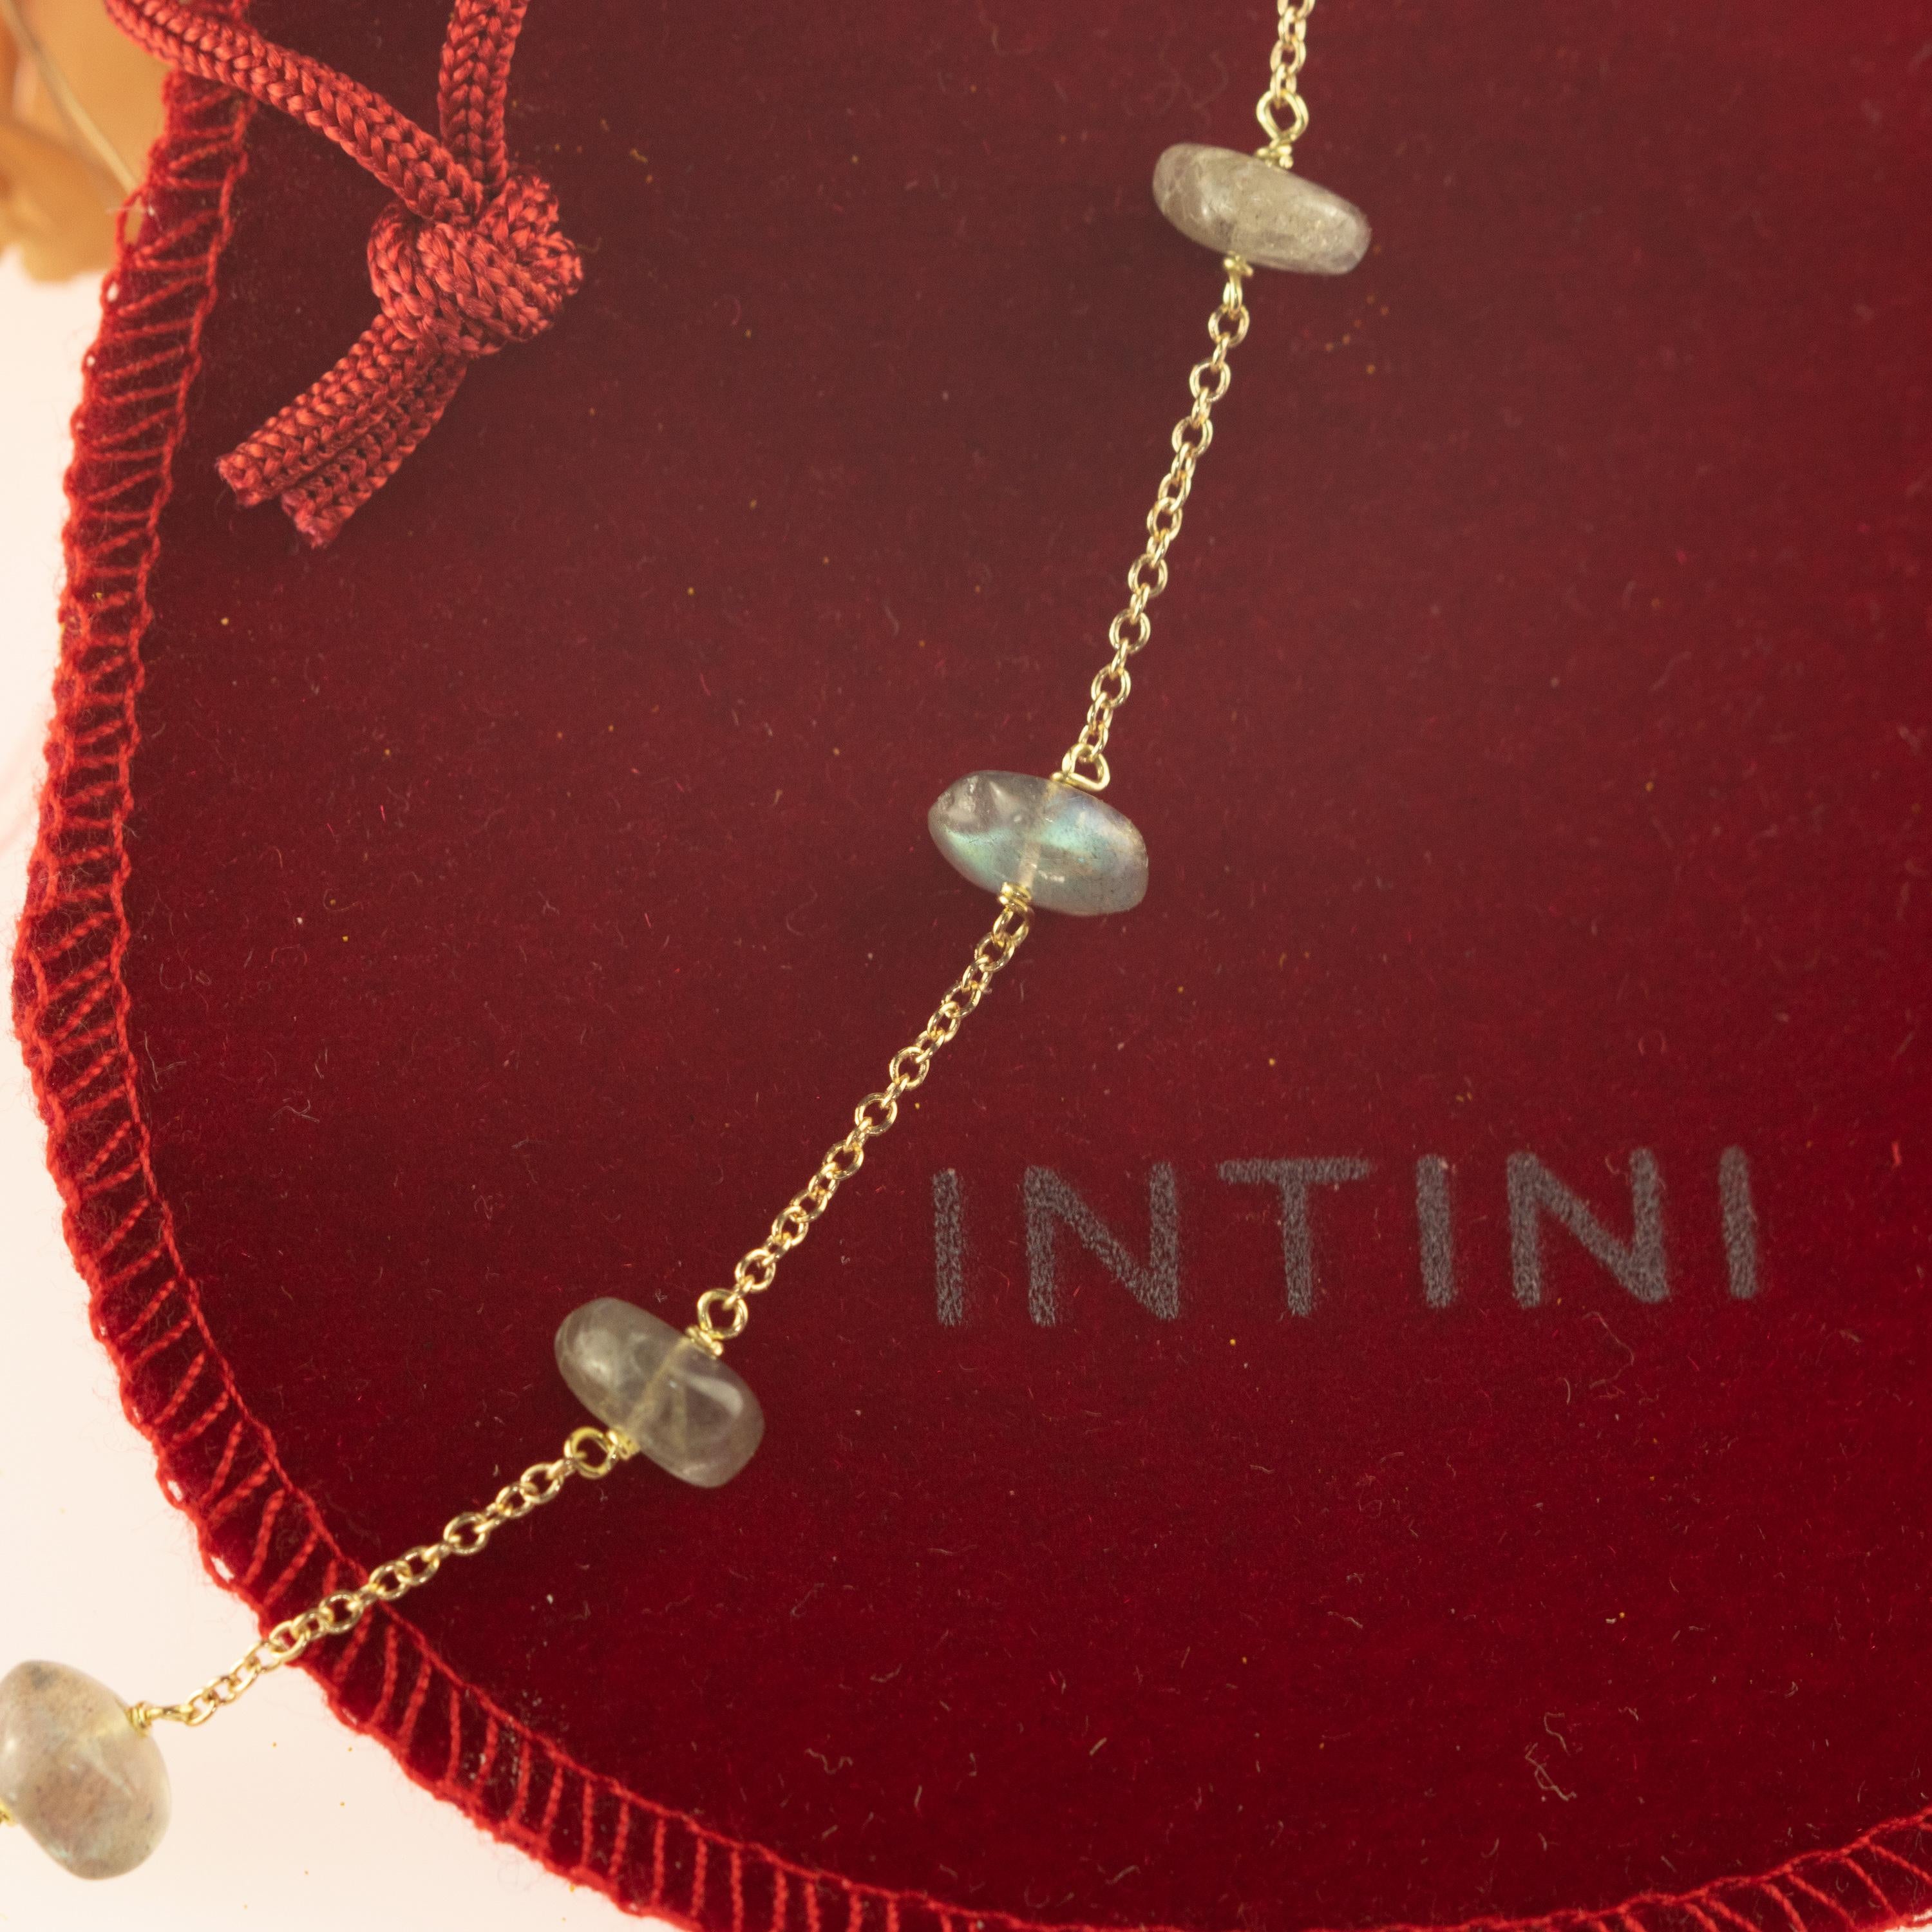 Intini Jewes Gold Plate Chain Cat's Eye Rondelles Handmade Anklet Bracelet In New Condition For Sale In Milano, IT